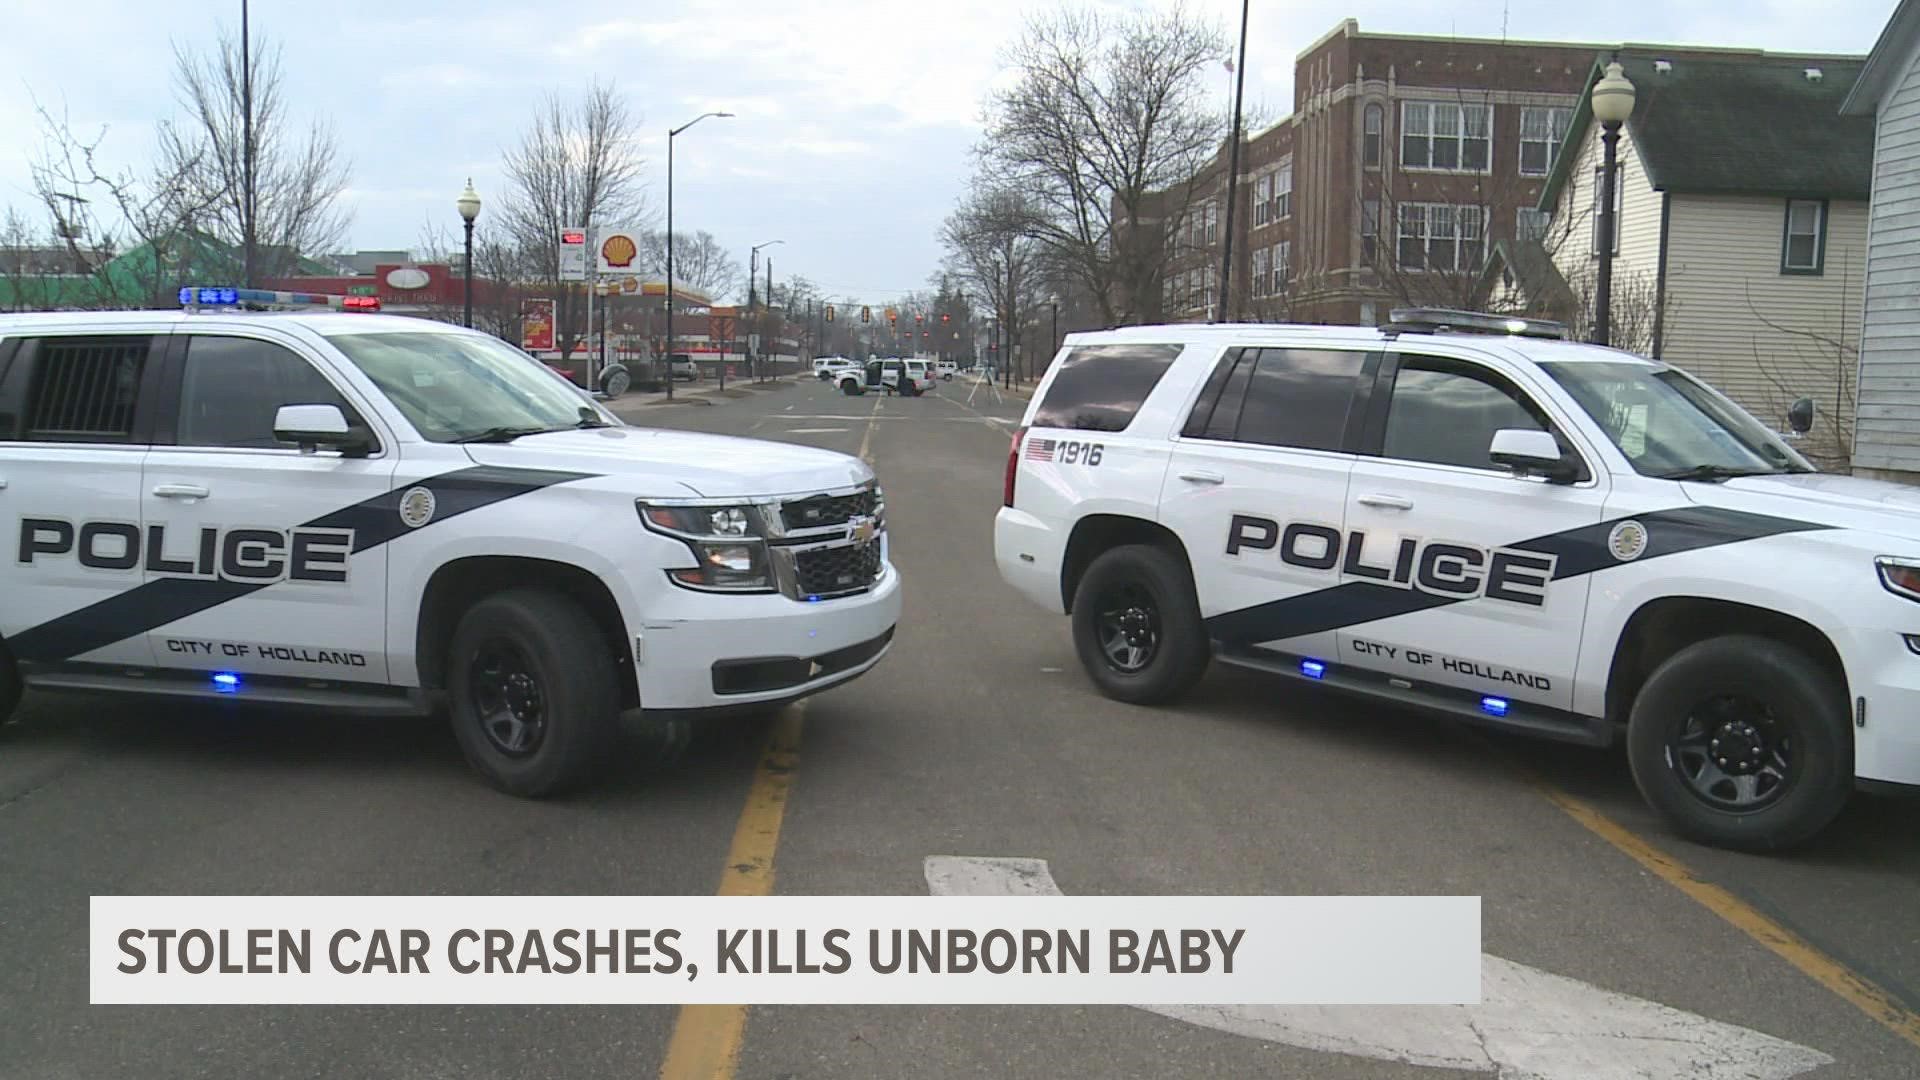 Around 8:15 a.m. Wednesday morning a 21-year-old man fled from an officer in a stolen vehicle, causing a crash that killed an unborn child and injured two people.